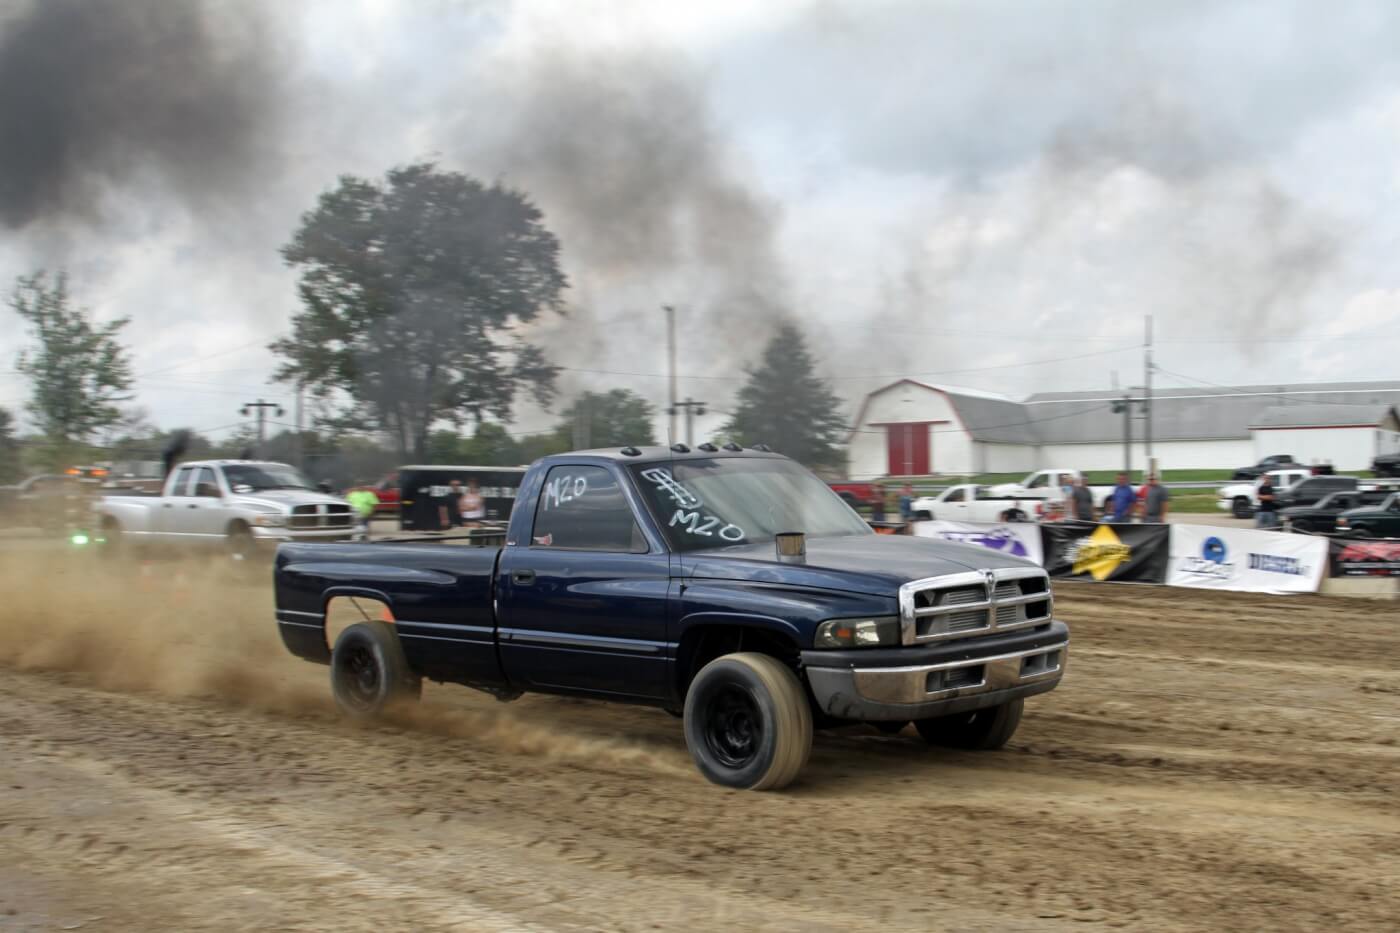 Chase Lunsford made sub 4.99-second passes throughout the day and likely would have made the final rounds of the Modified Diesel class interesting if he did not have to leave the event early.